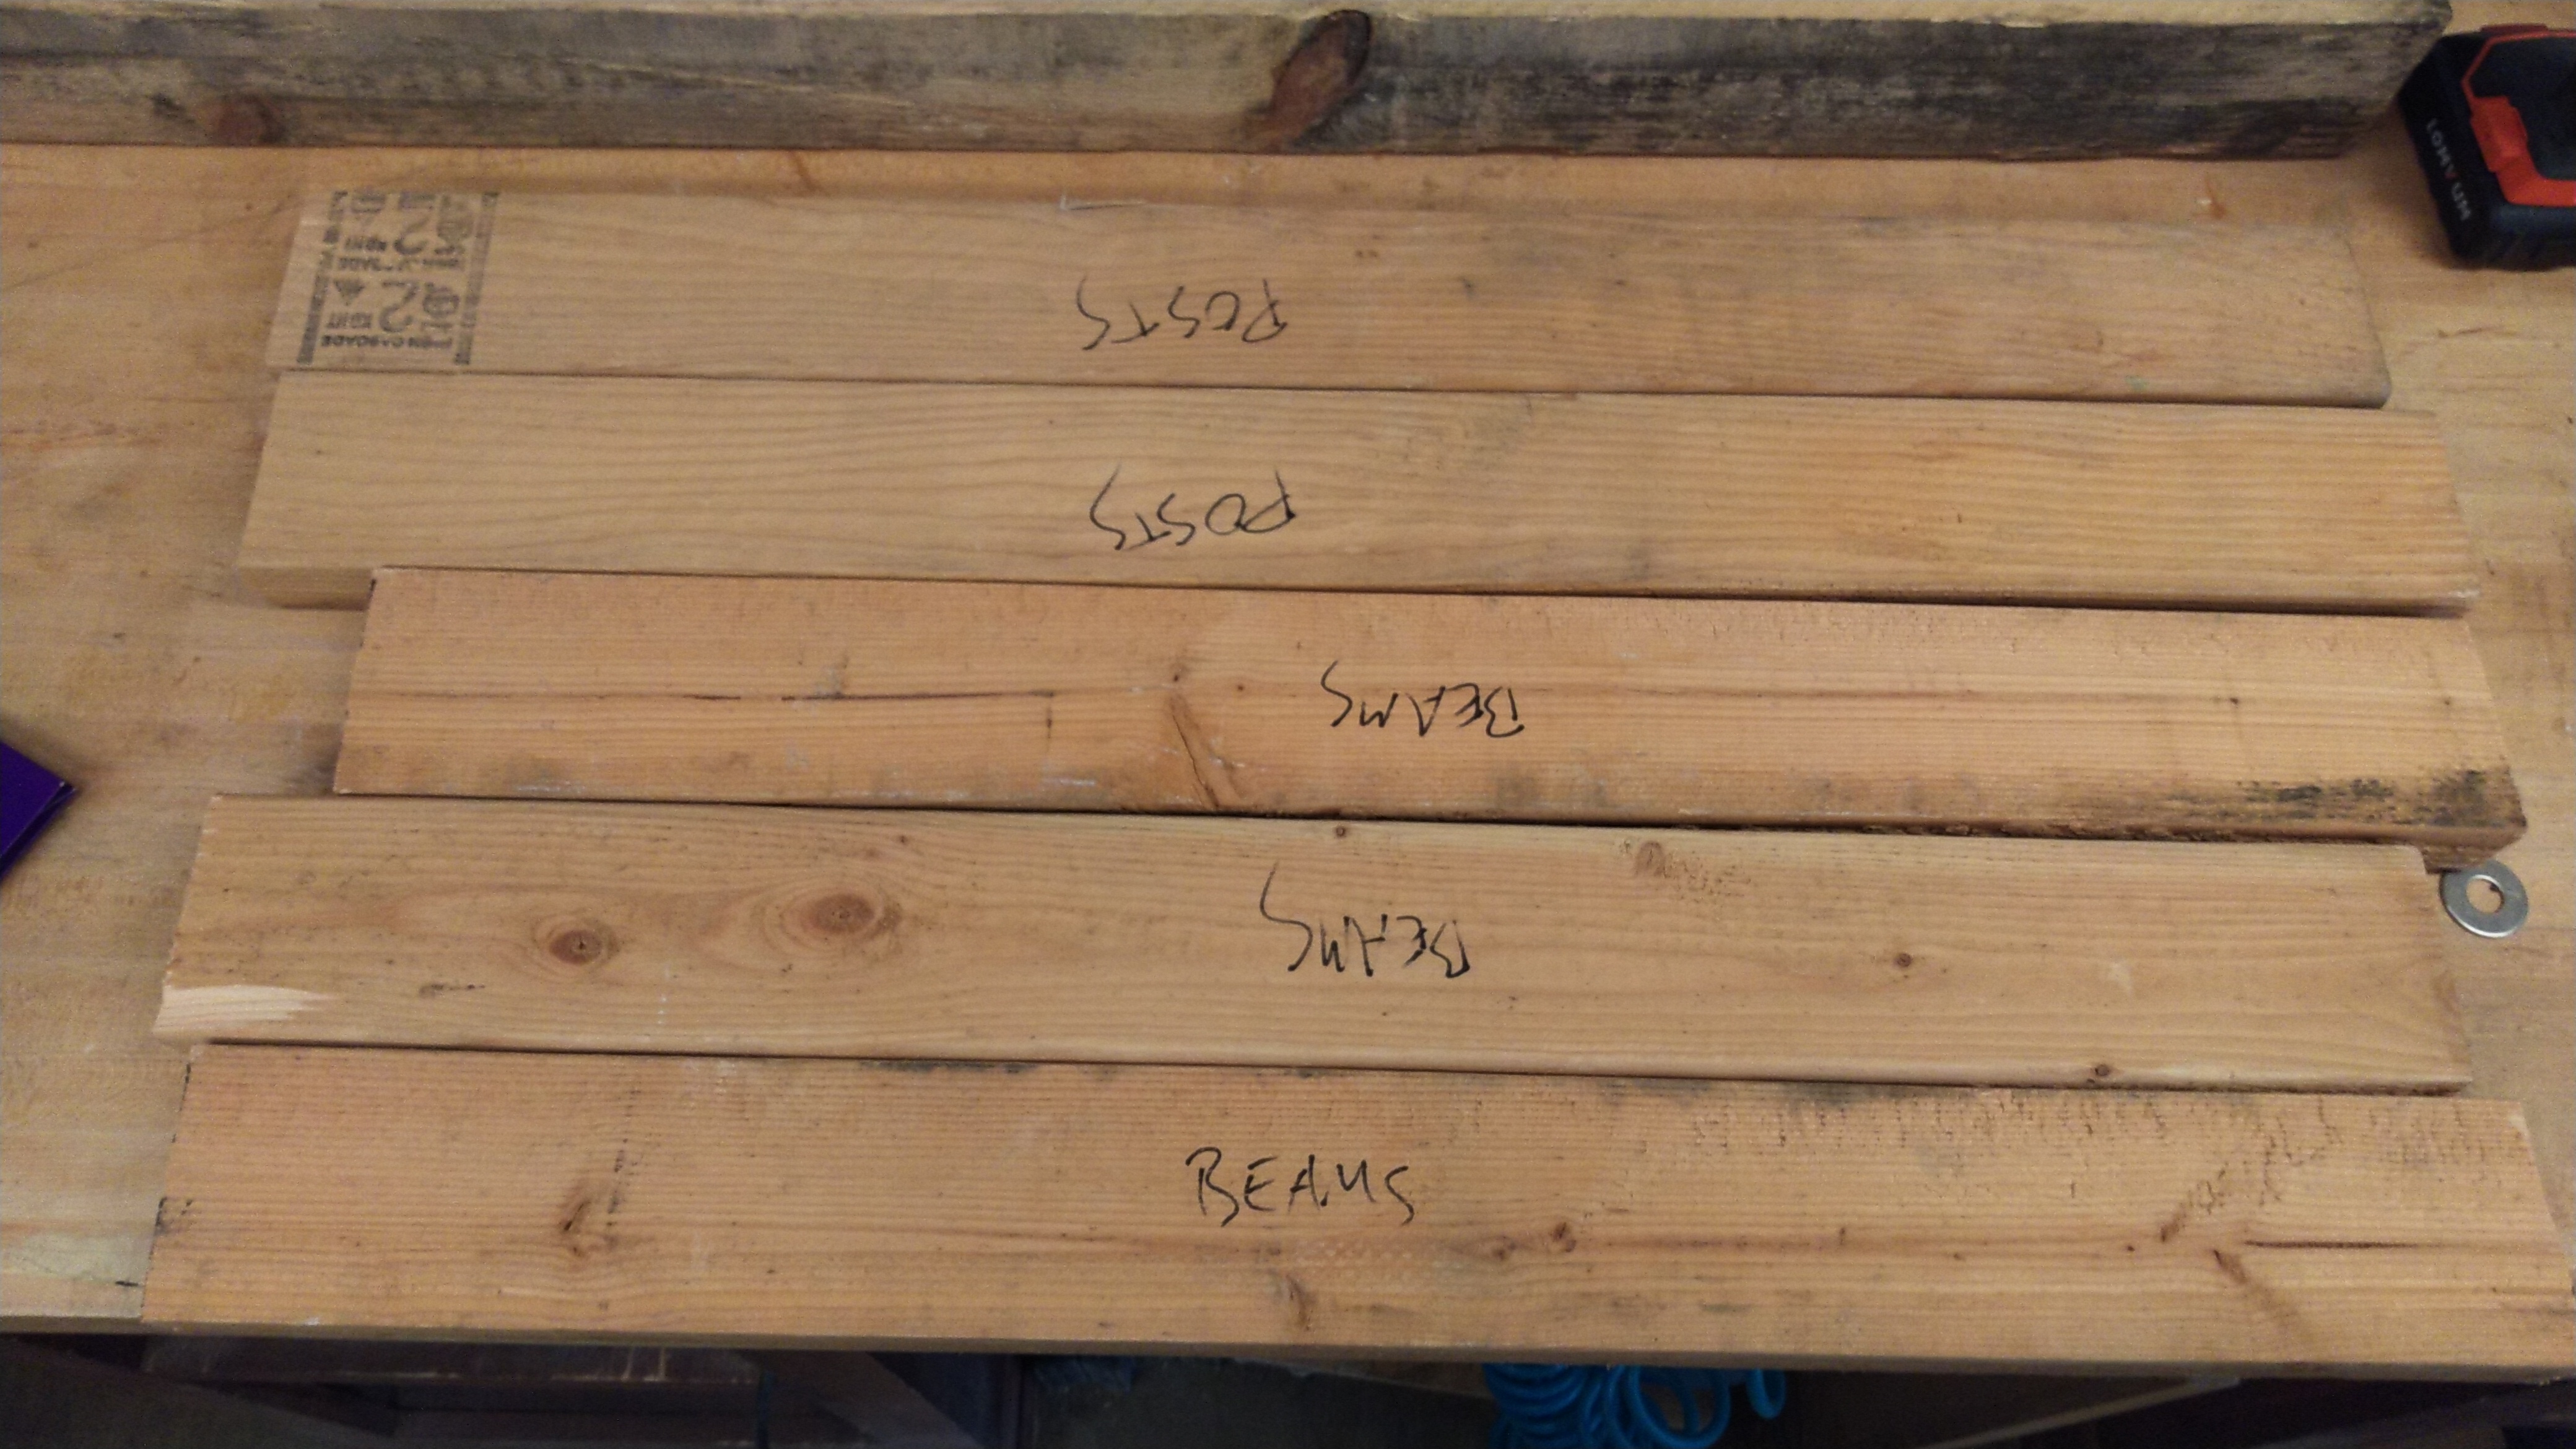 Five 2x4s, two labeled posts, two labeled beams